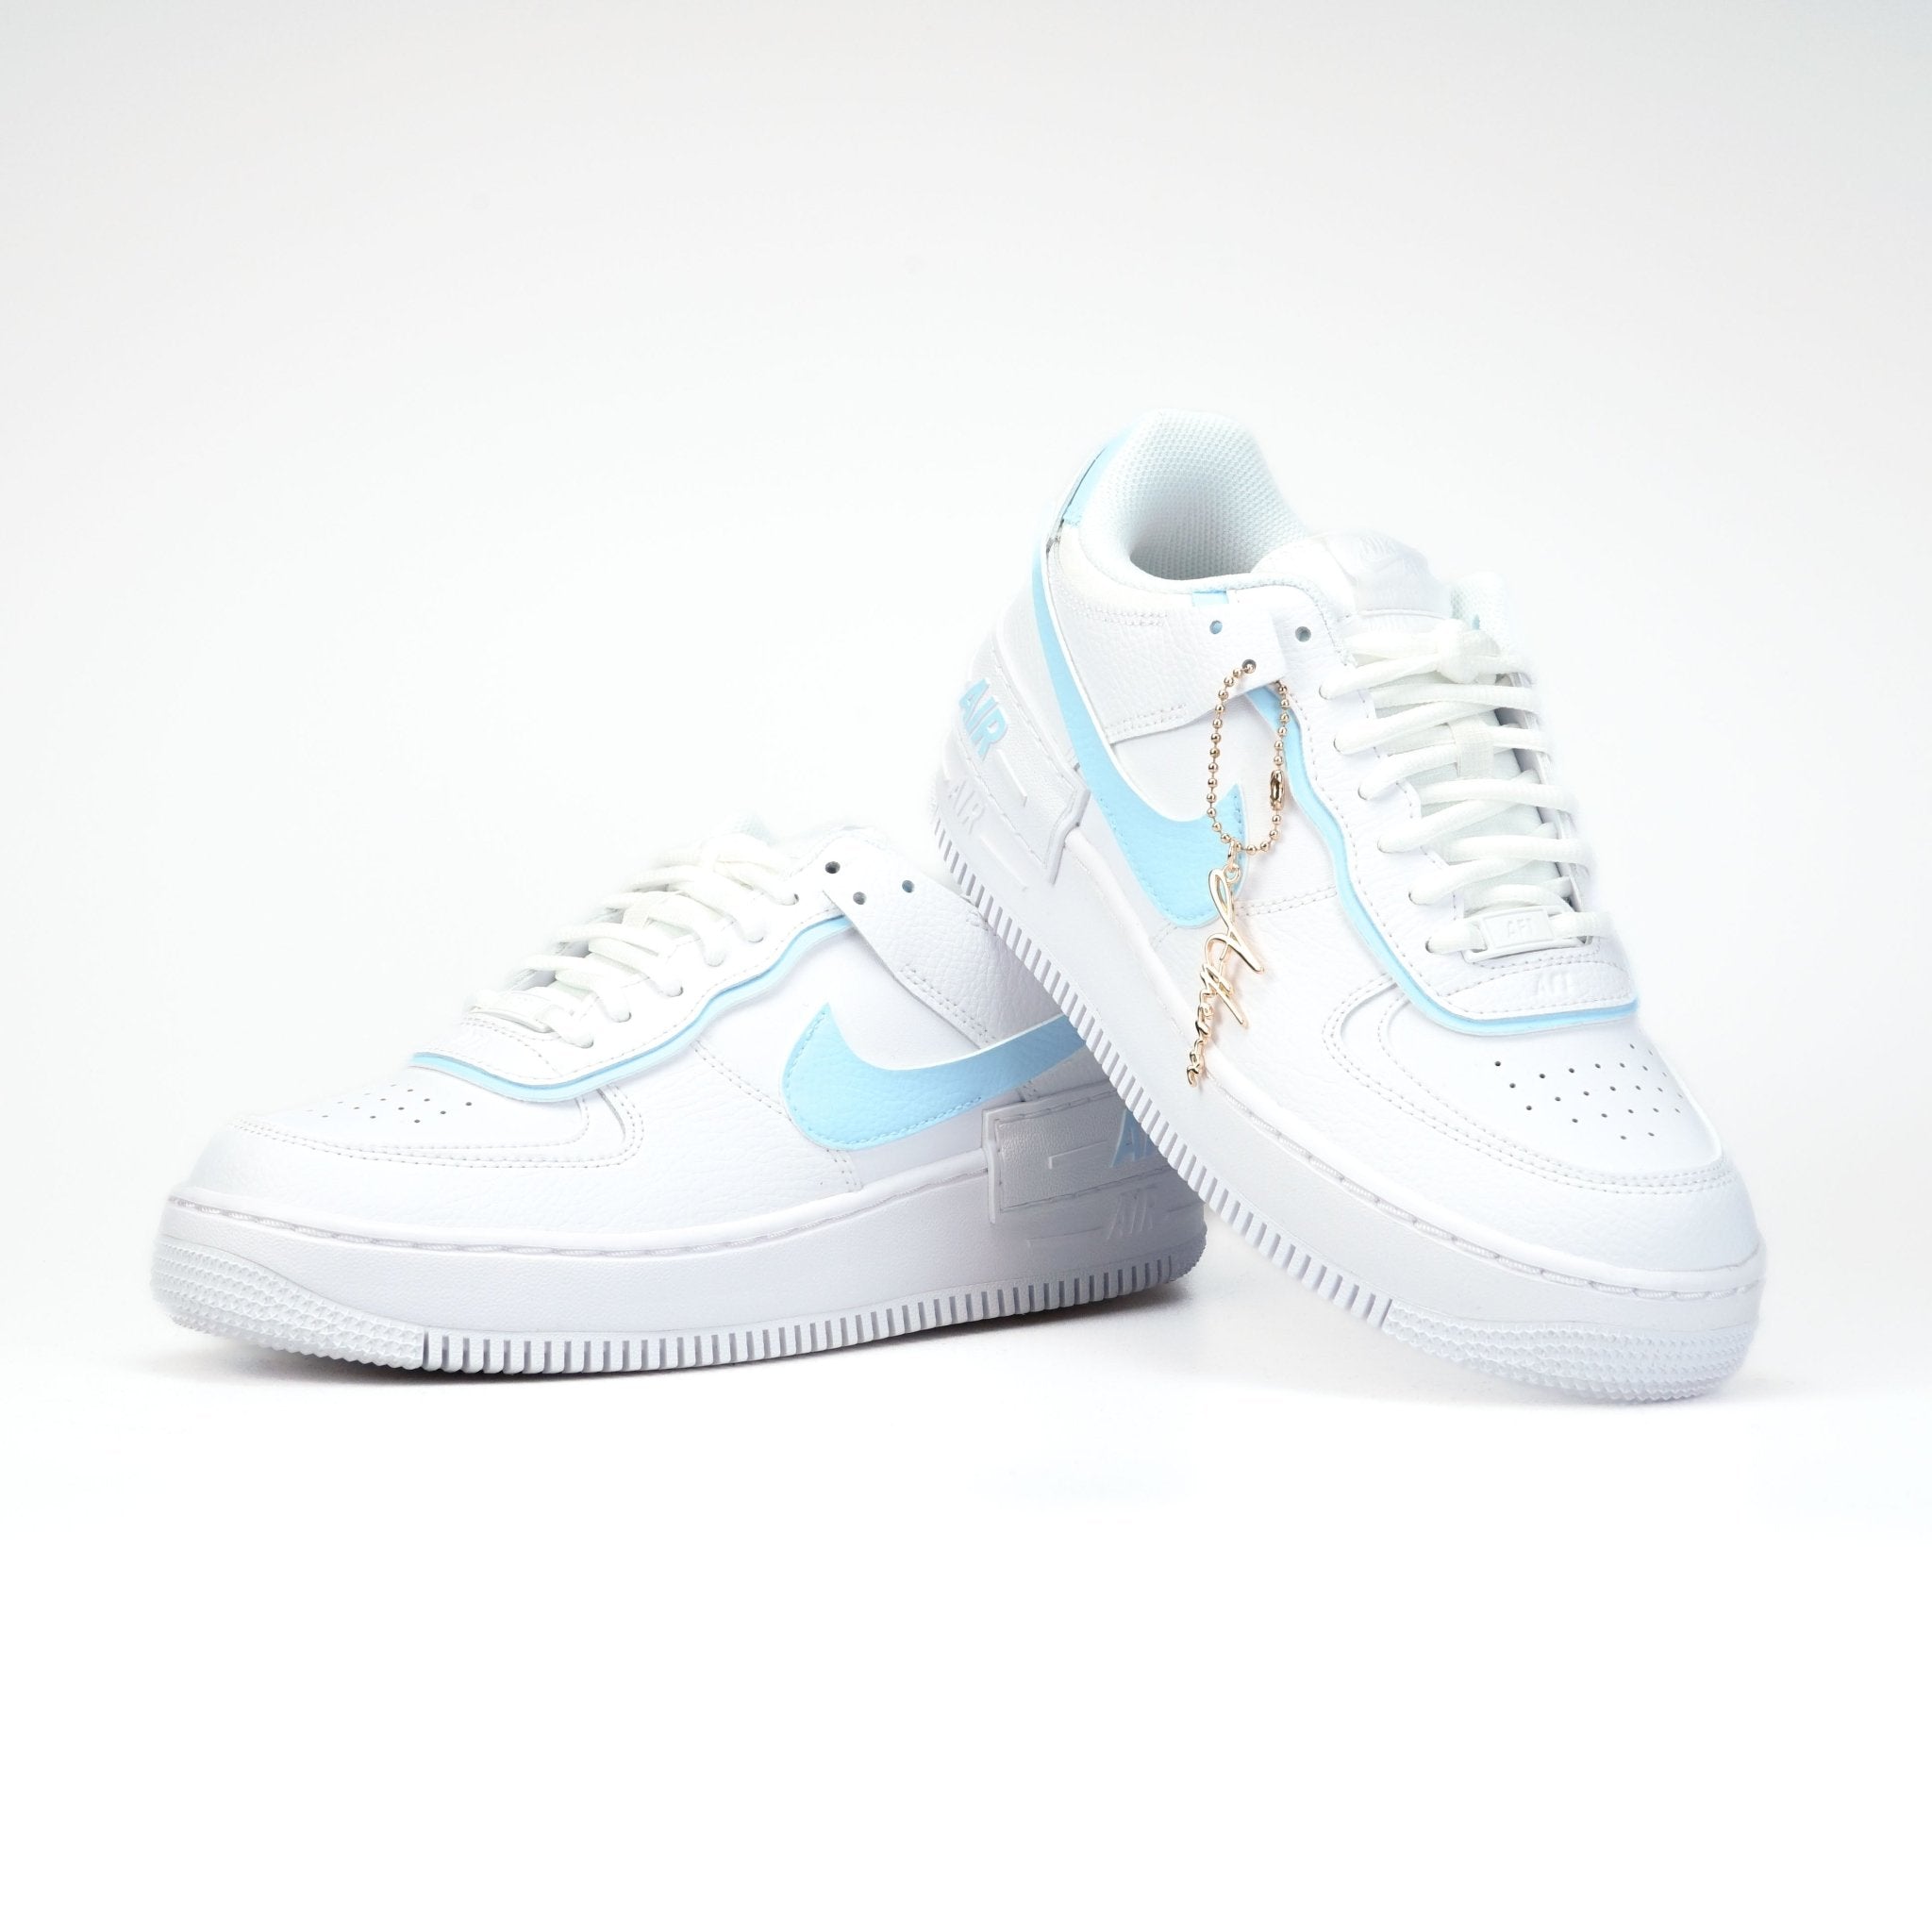 Custom Nike Air Force 1 Shadow Painted Shoes For Women And Men Blue ATHENA